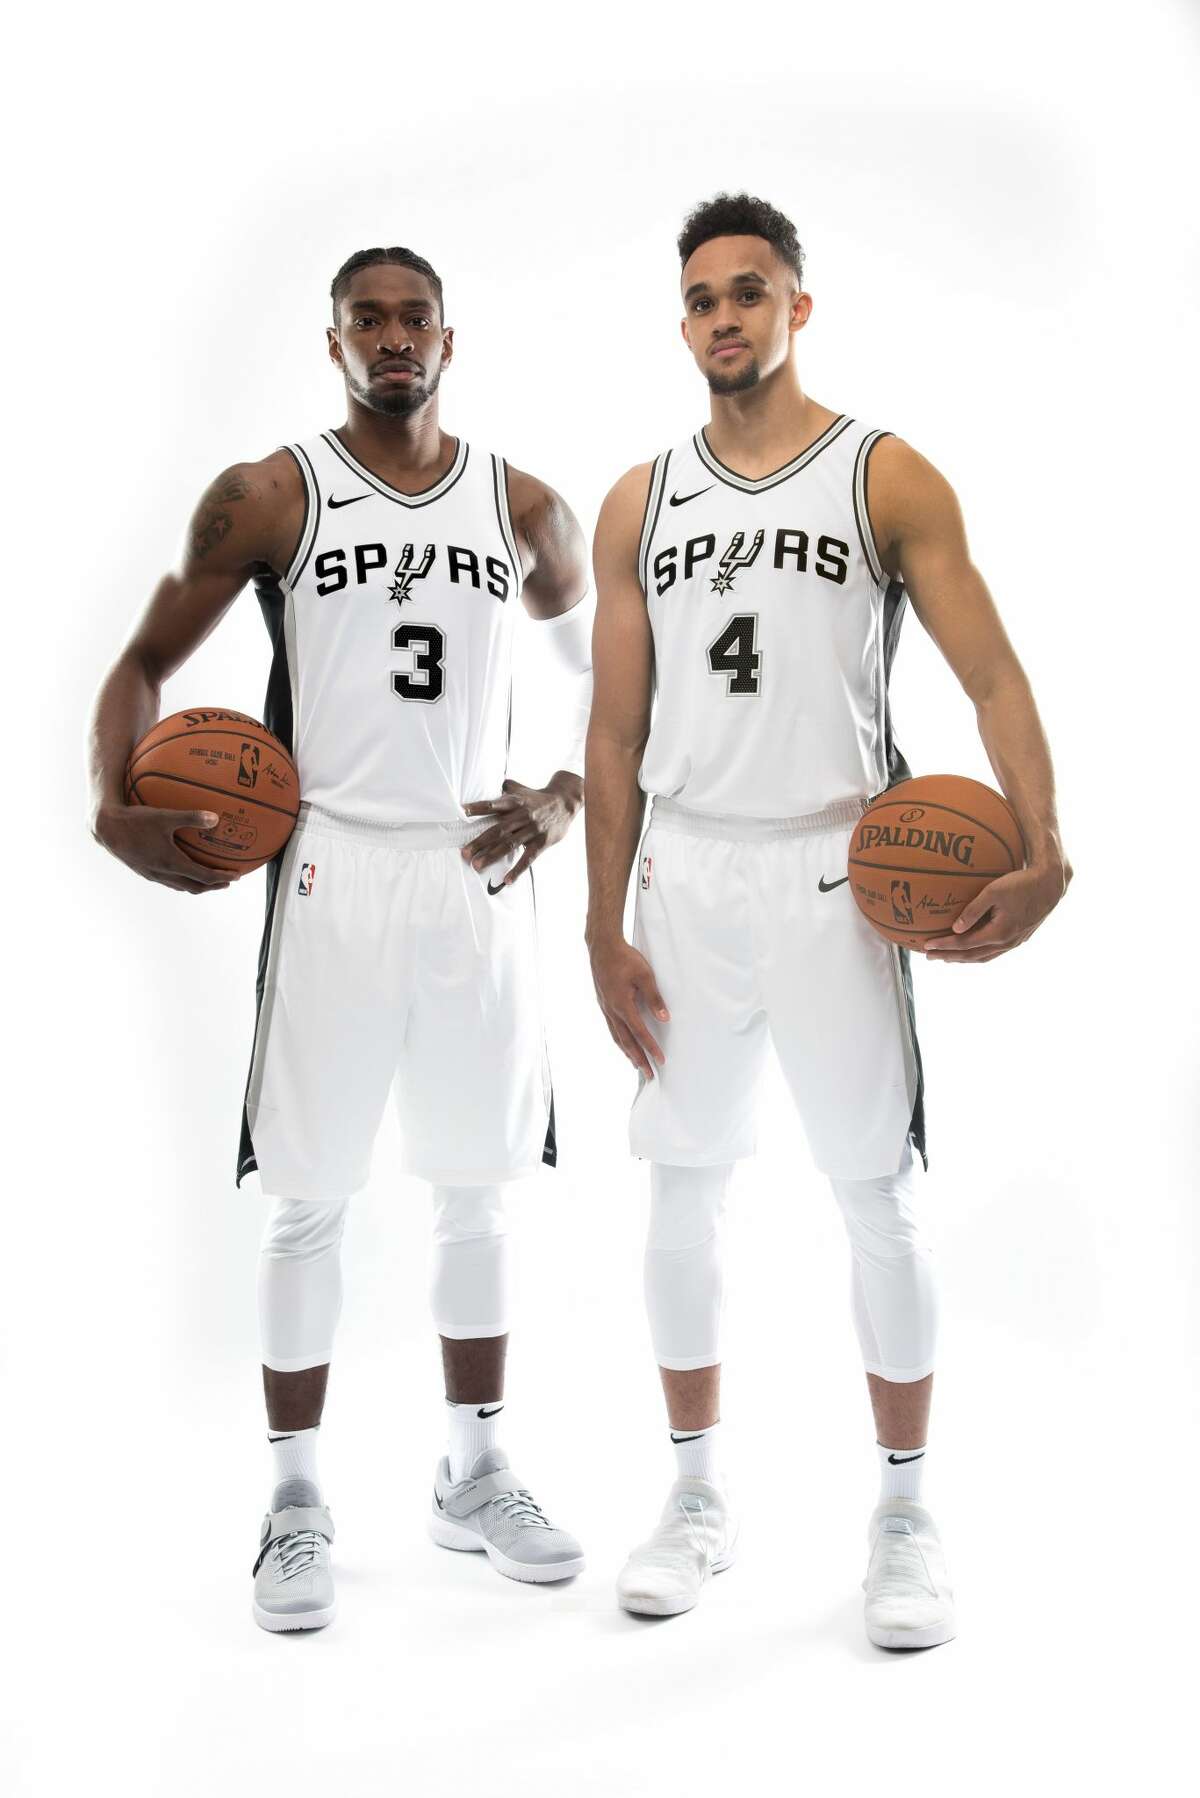 New Nike jerseys for the San Antonio Spurs were unveiled on Friday, Aug. 11, 2017.